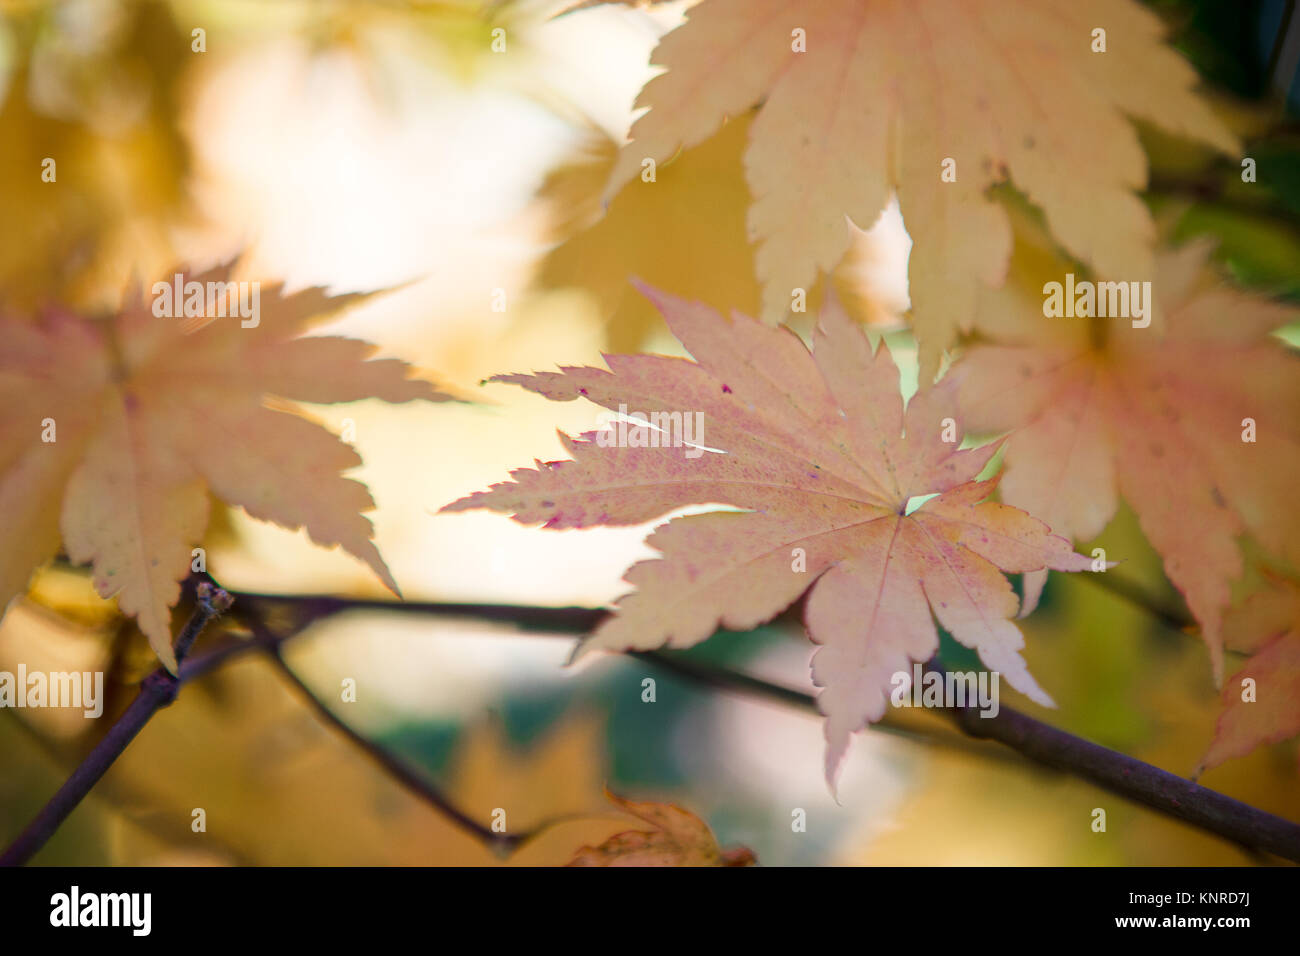 Fall maple leaves on branch closeup Stock Photo